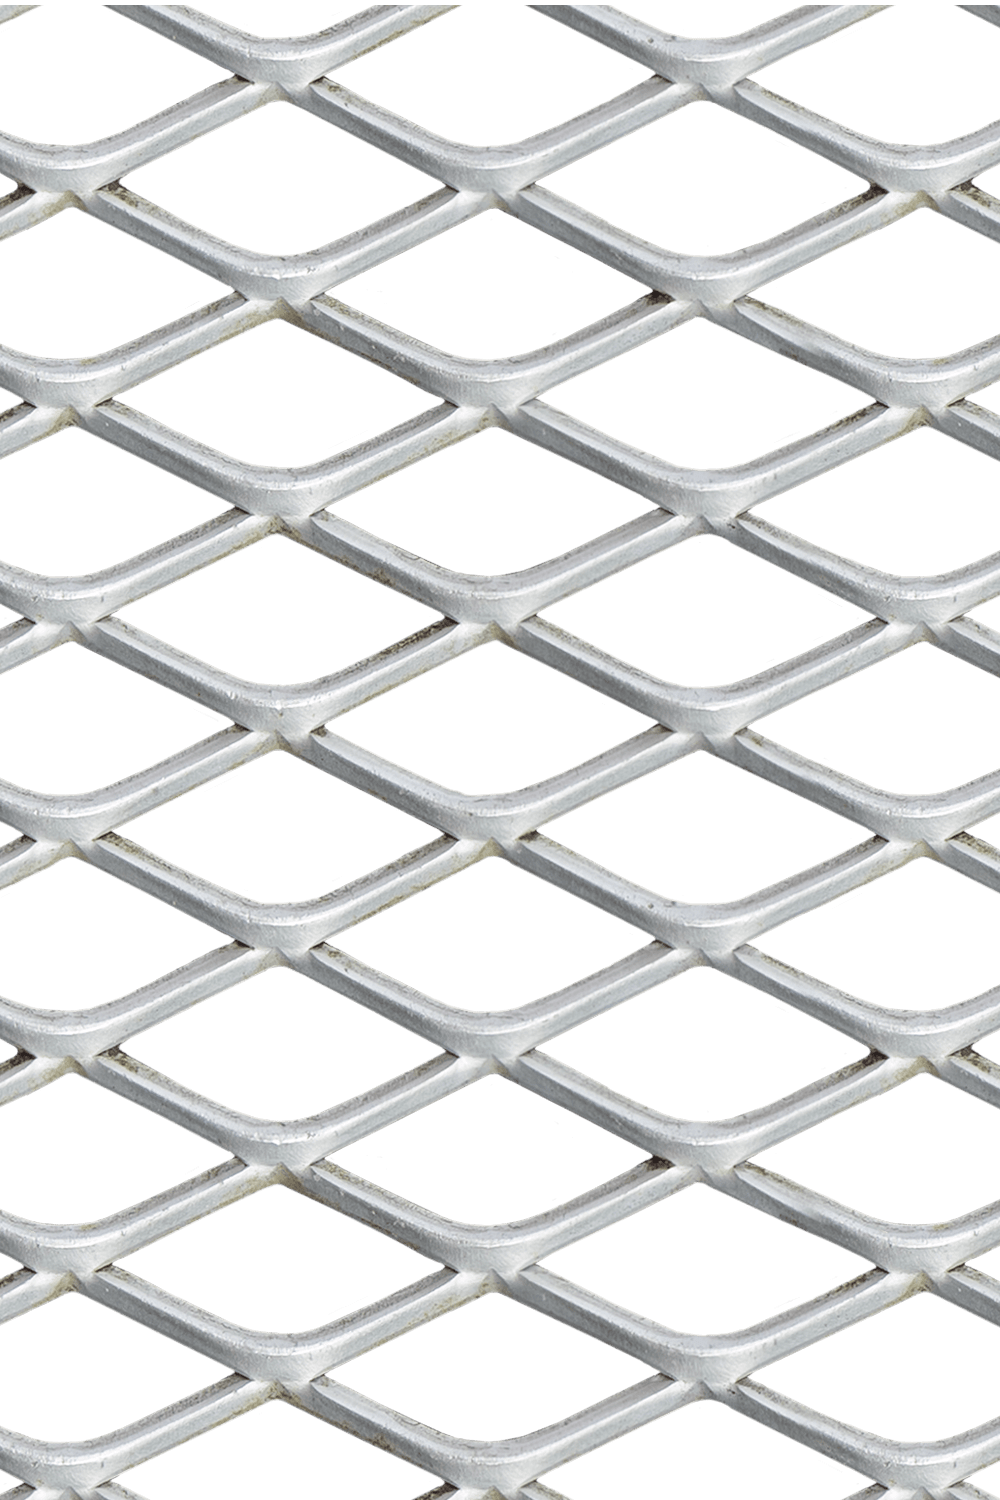 stretched metal mesh close-up